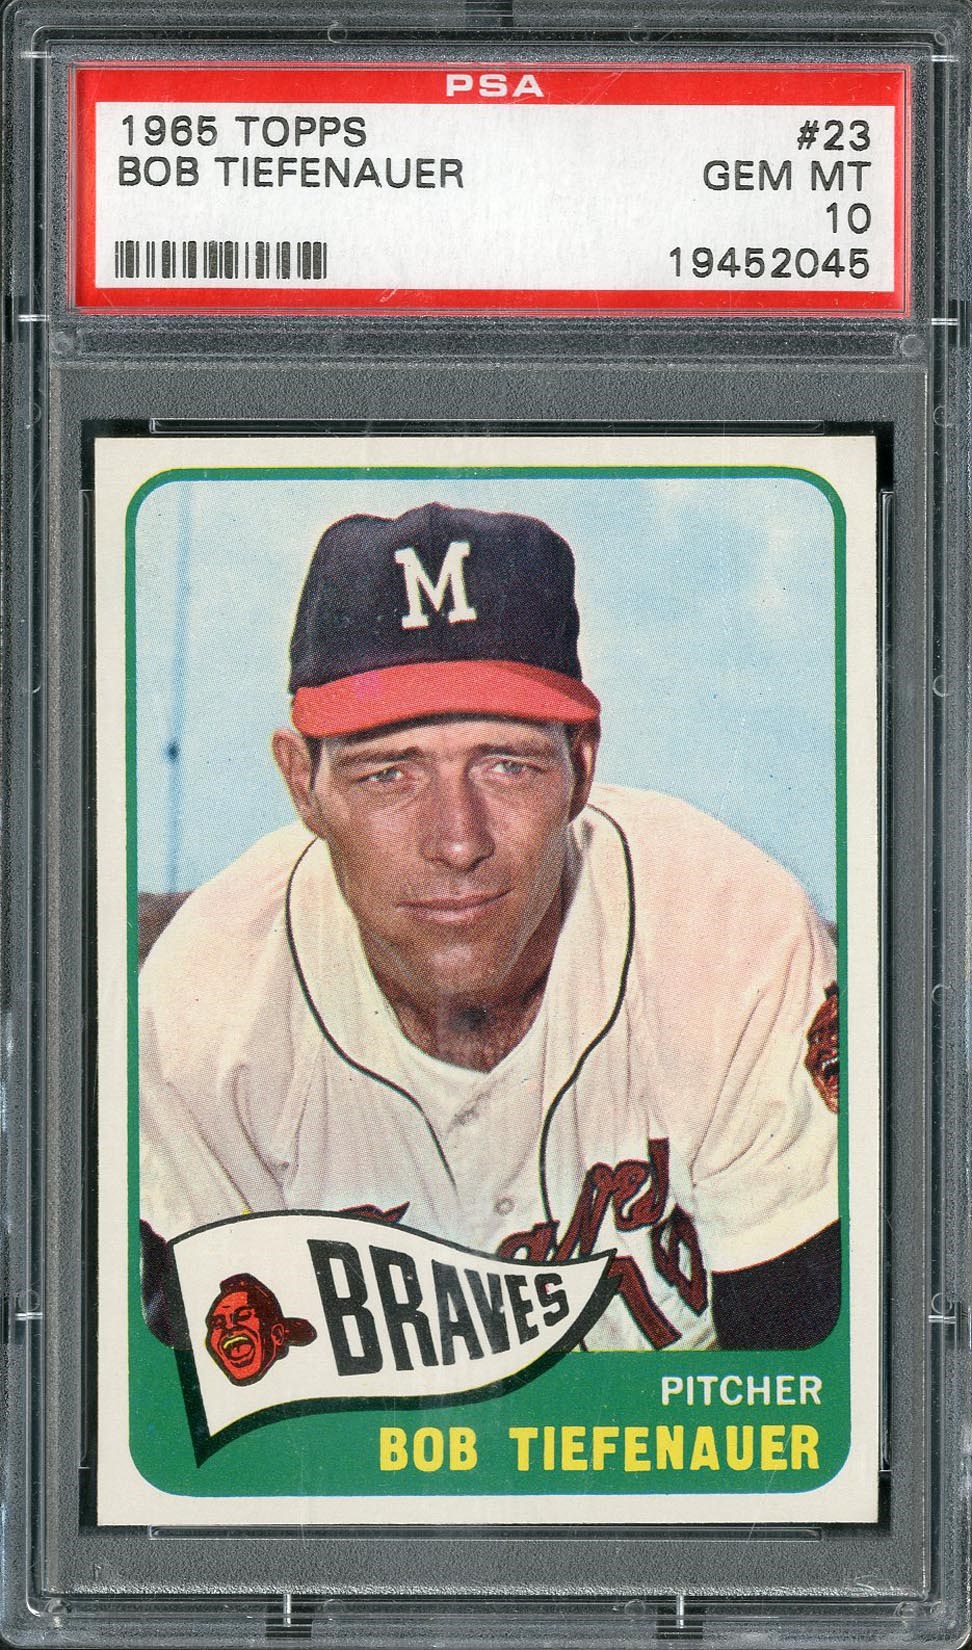 Baseball and Trading Cards - 1965 Topps Bob Tiefenauer #23 PSA GEM MT 10